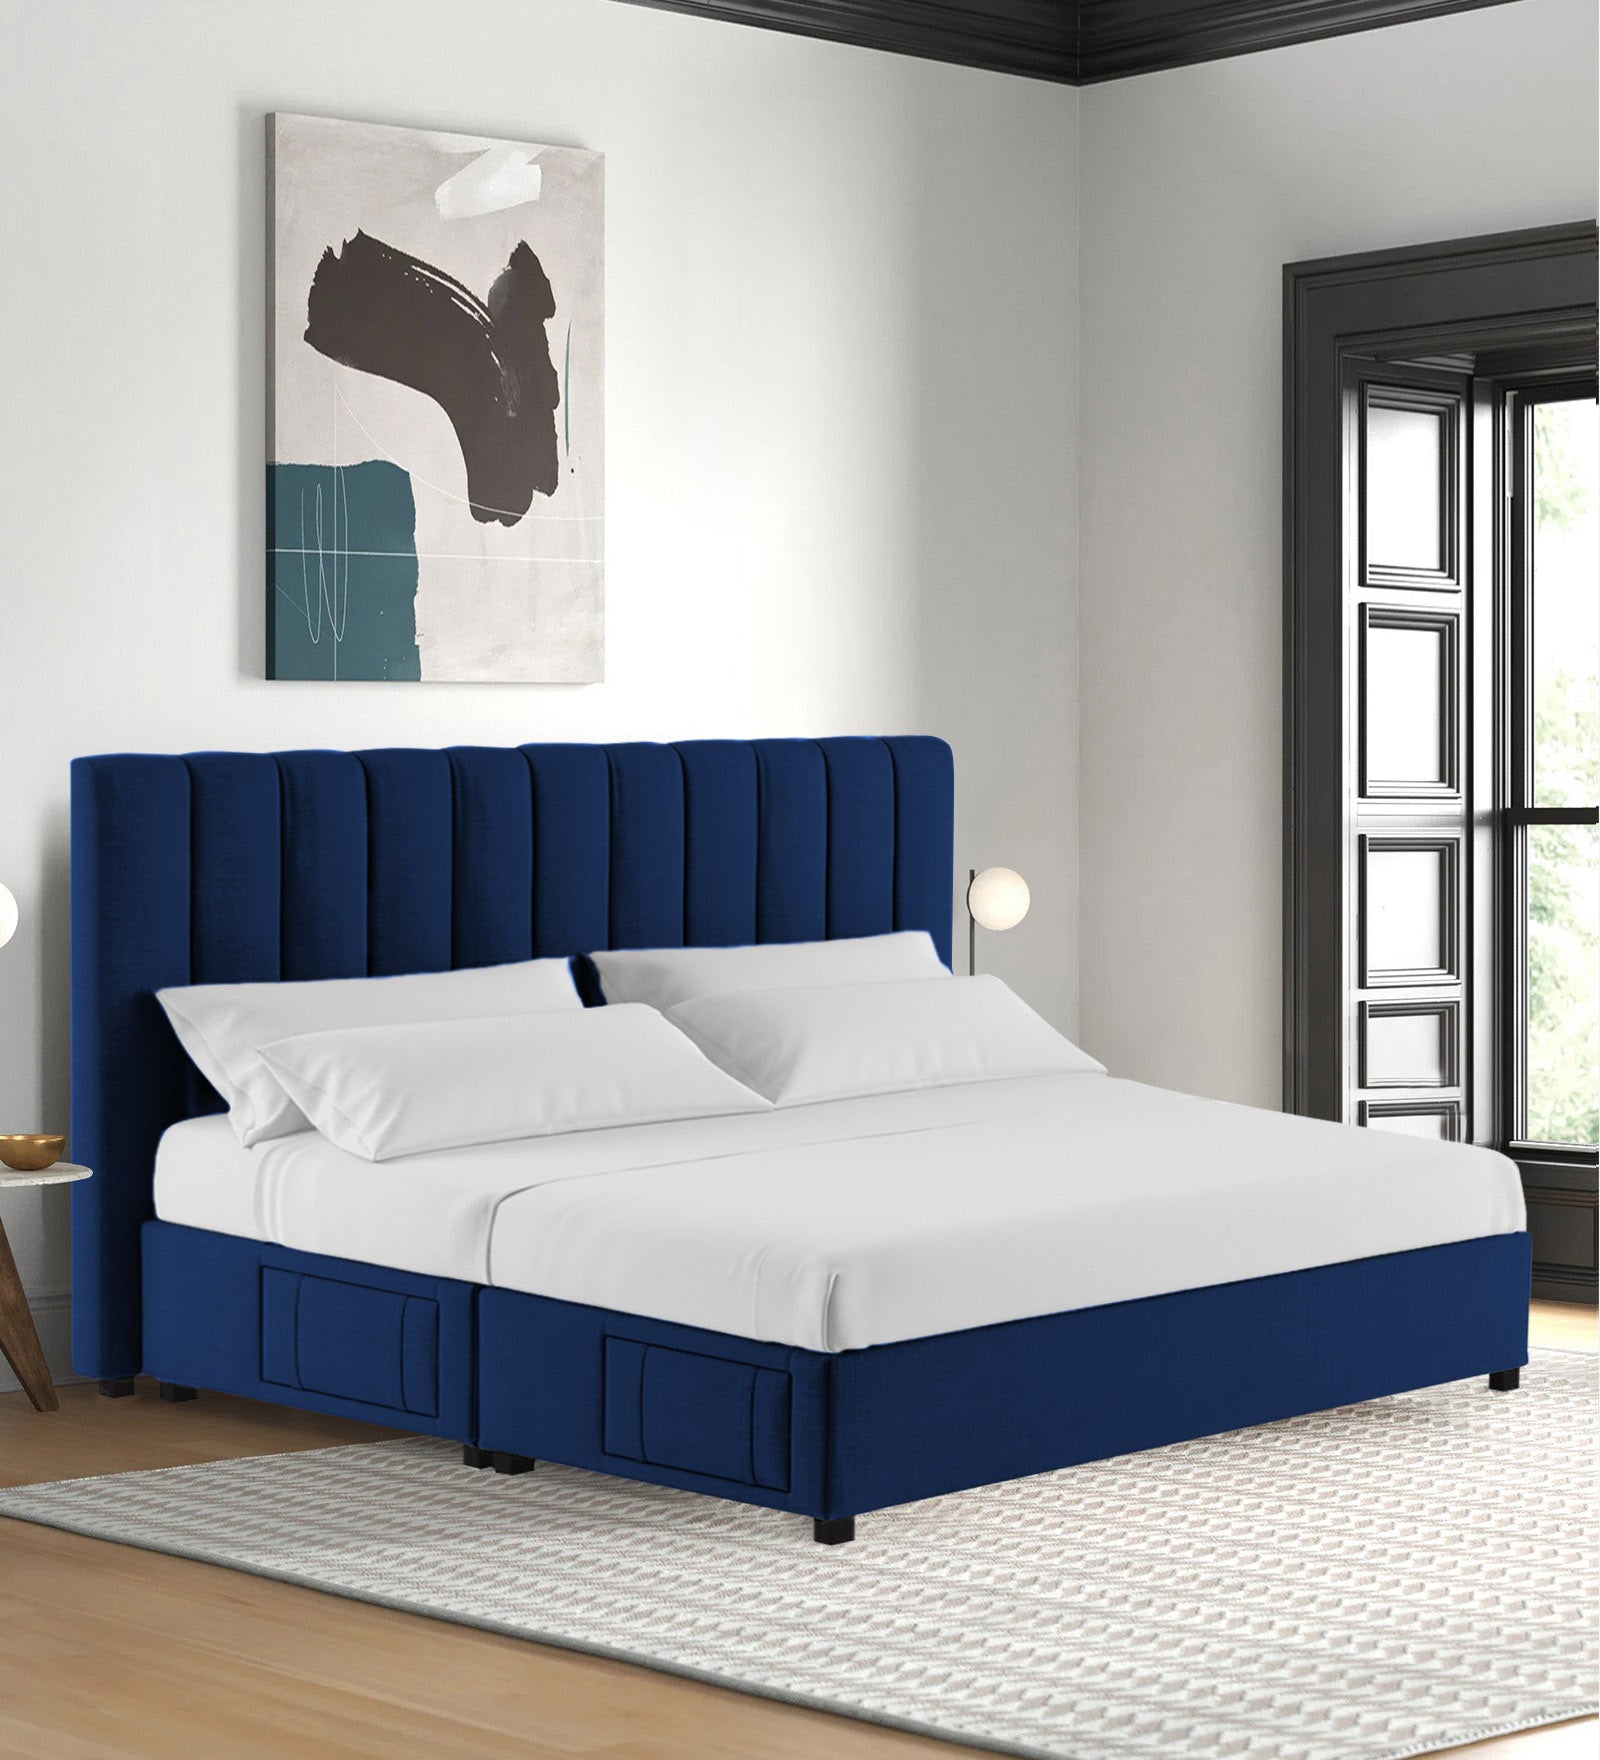 Nivi Fabric King Size Bed In Royal Blue Colour With Drawer Storage